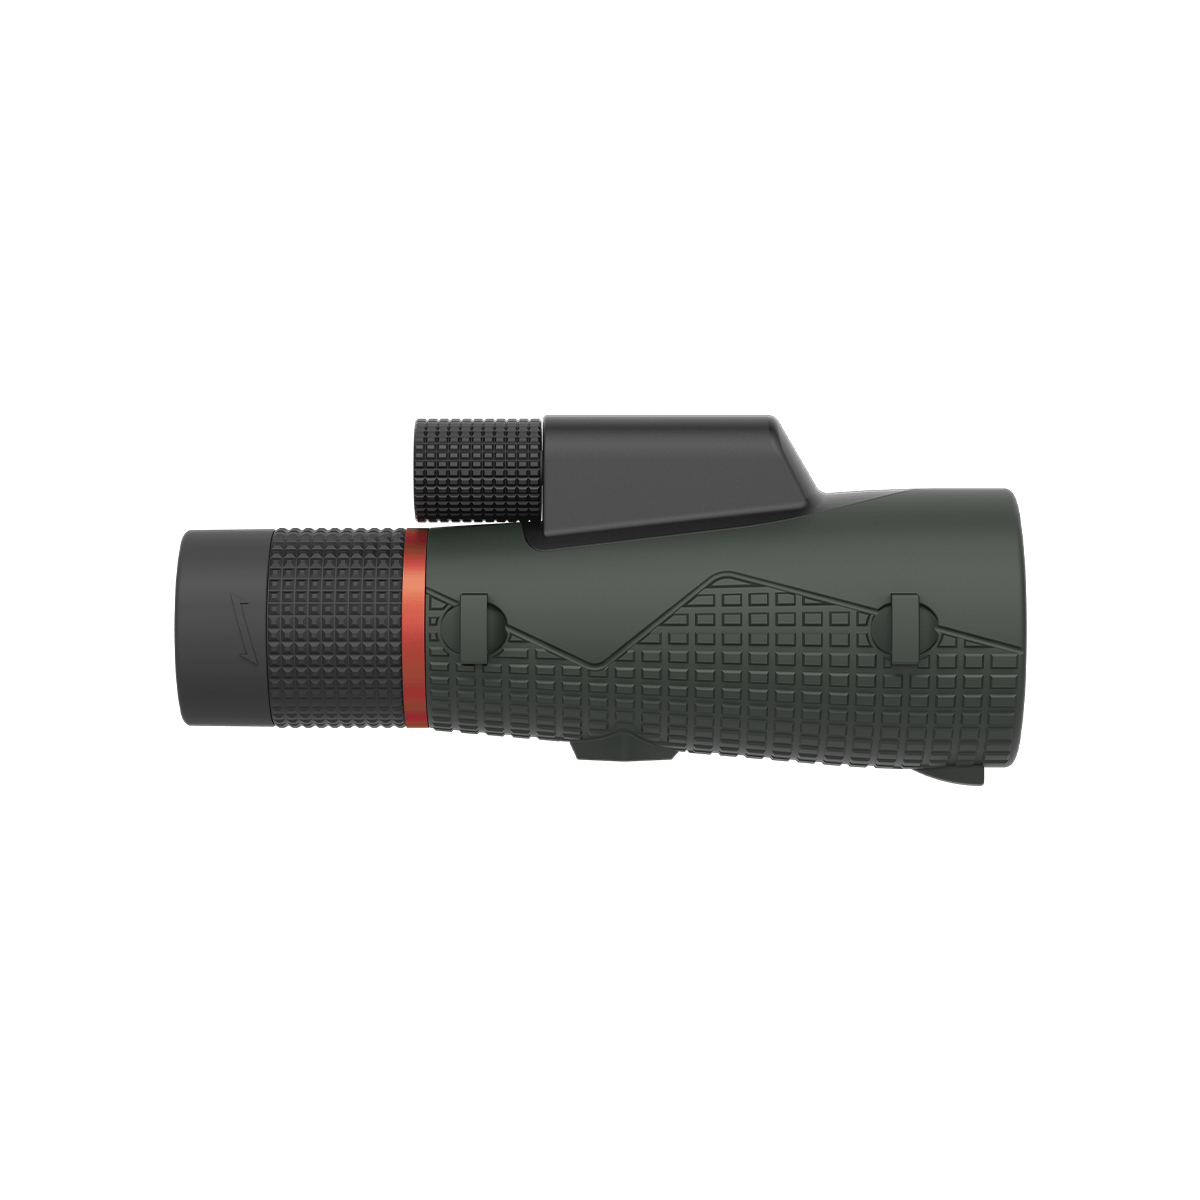 Forester 8-16x56 ED Monocular